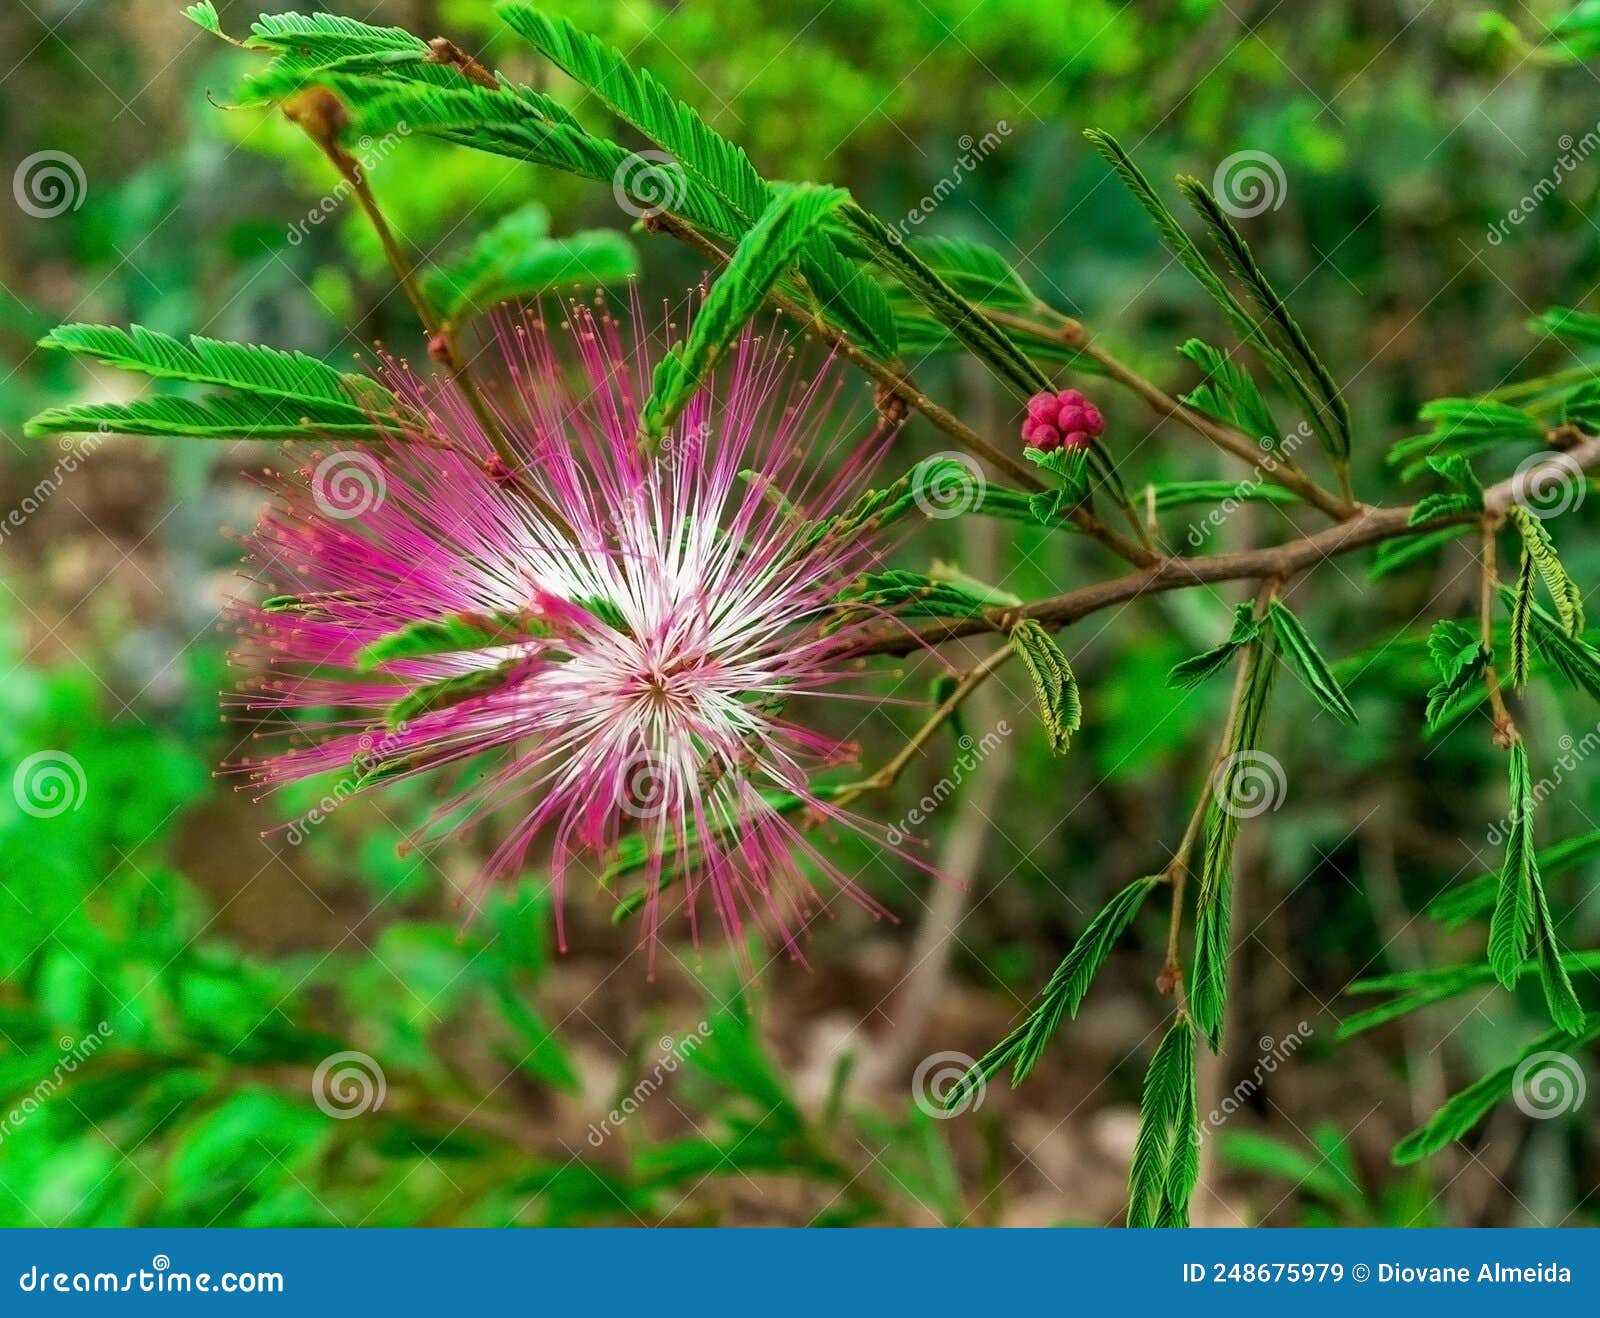 flower known as esponja or angel hair, a species of shrub photographed in the forests of the igarapÃÂ© region.